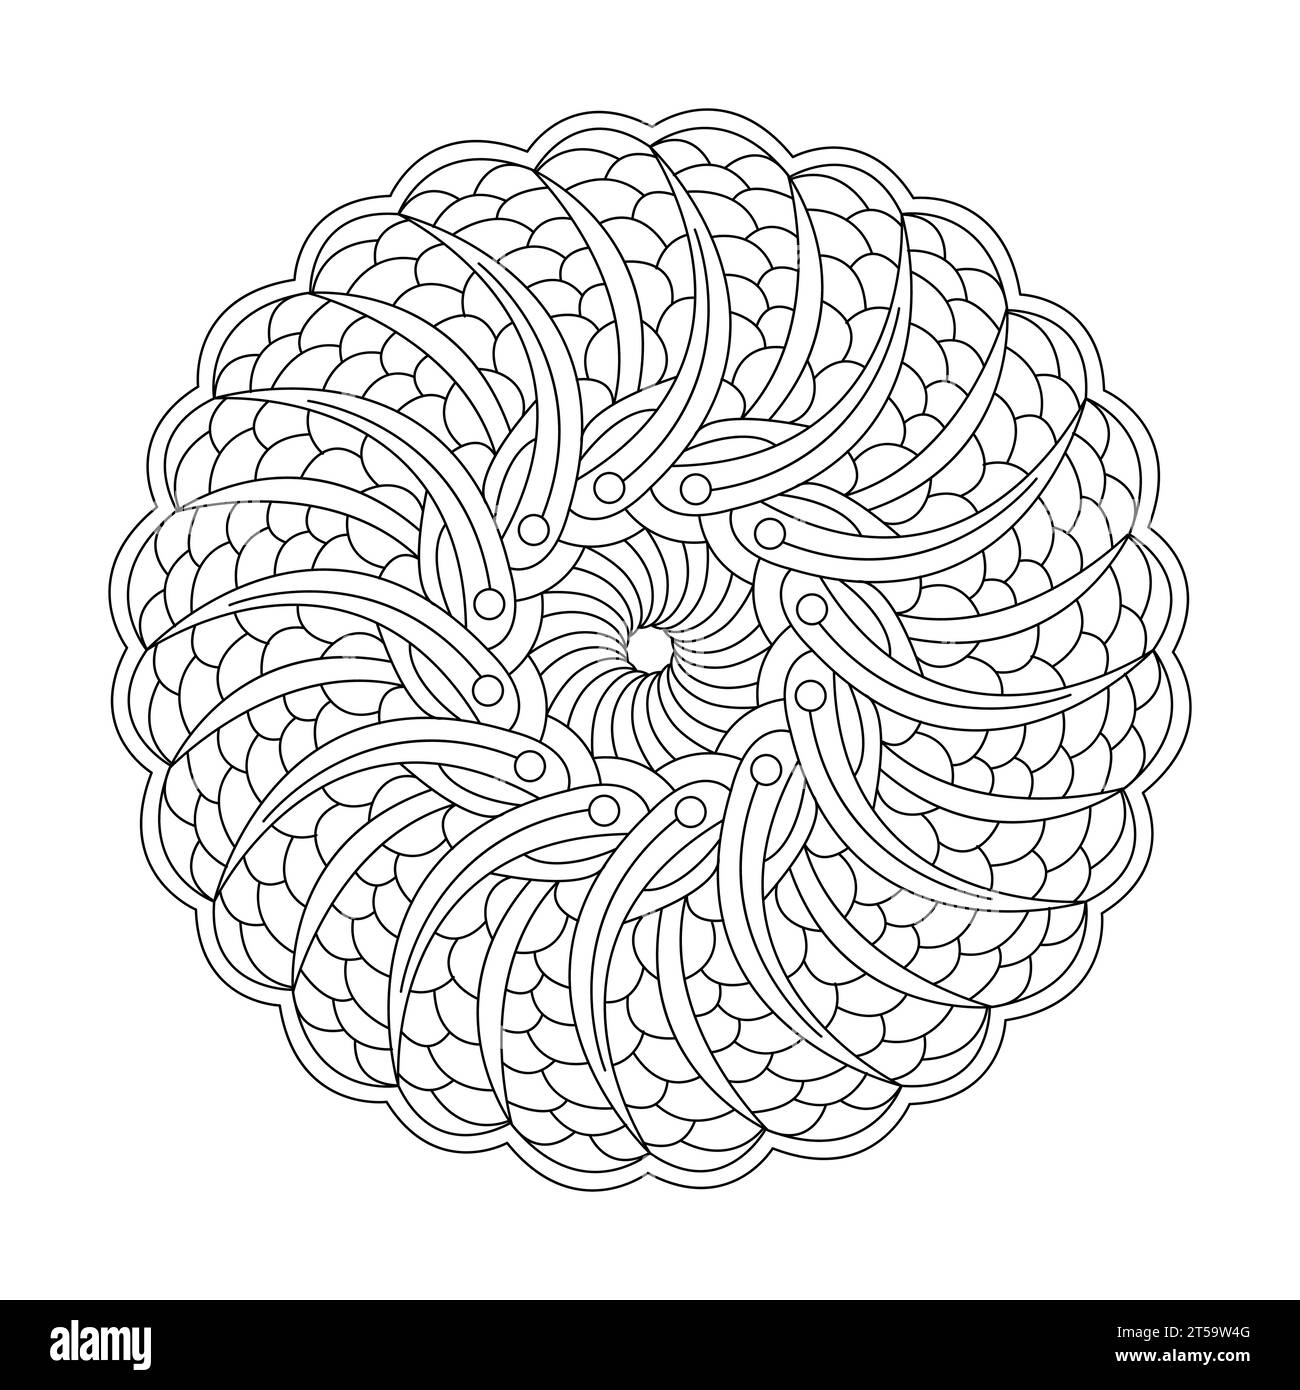 Whimsy in Waves rotate colouring book mandala page for KDP book interior, Ability to Relax, Brain Experiences, Harmonious Haven, Peaceful Portraits, Stock Vector